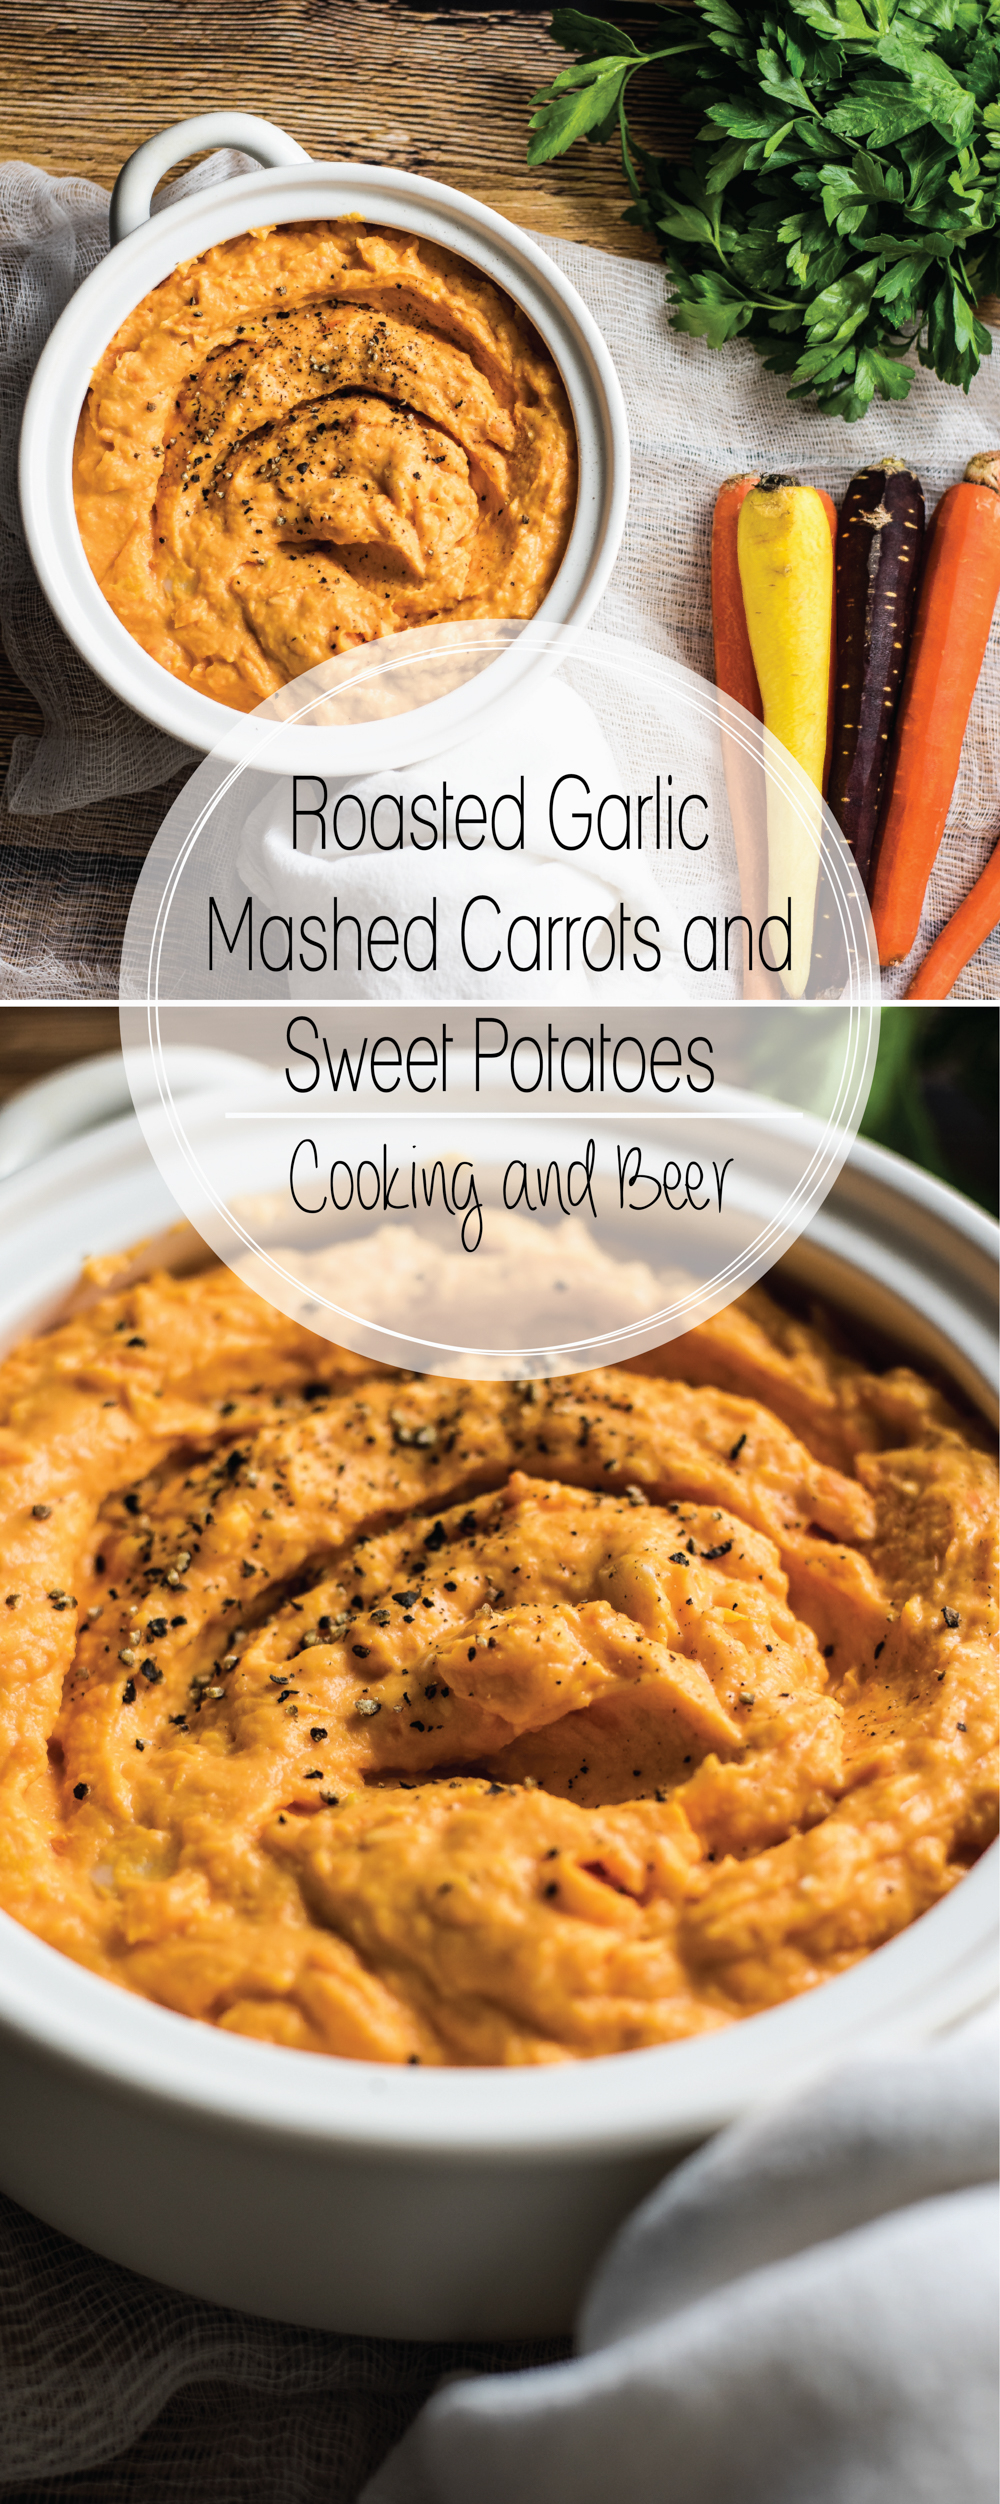 Roasted garlic mashed sweet potatoes and carrots is the perfect side dish to serve this fall!